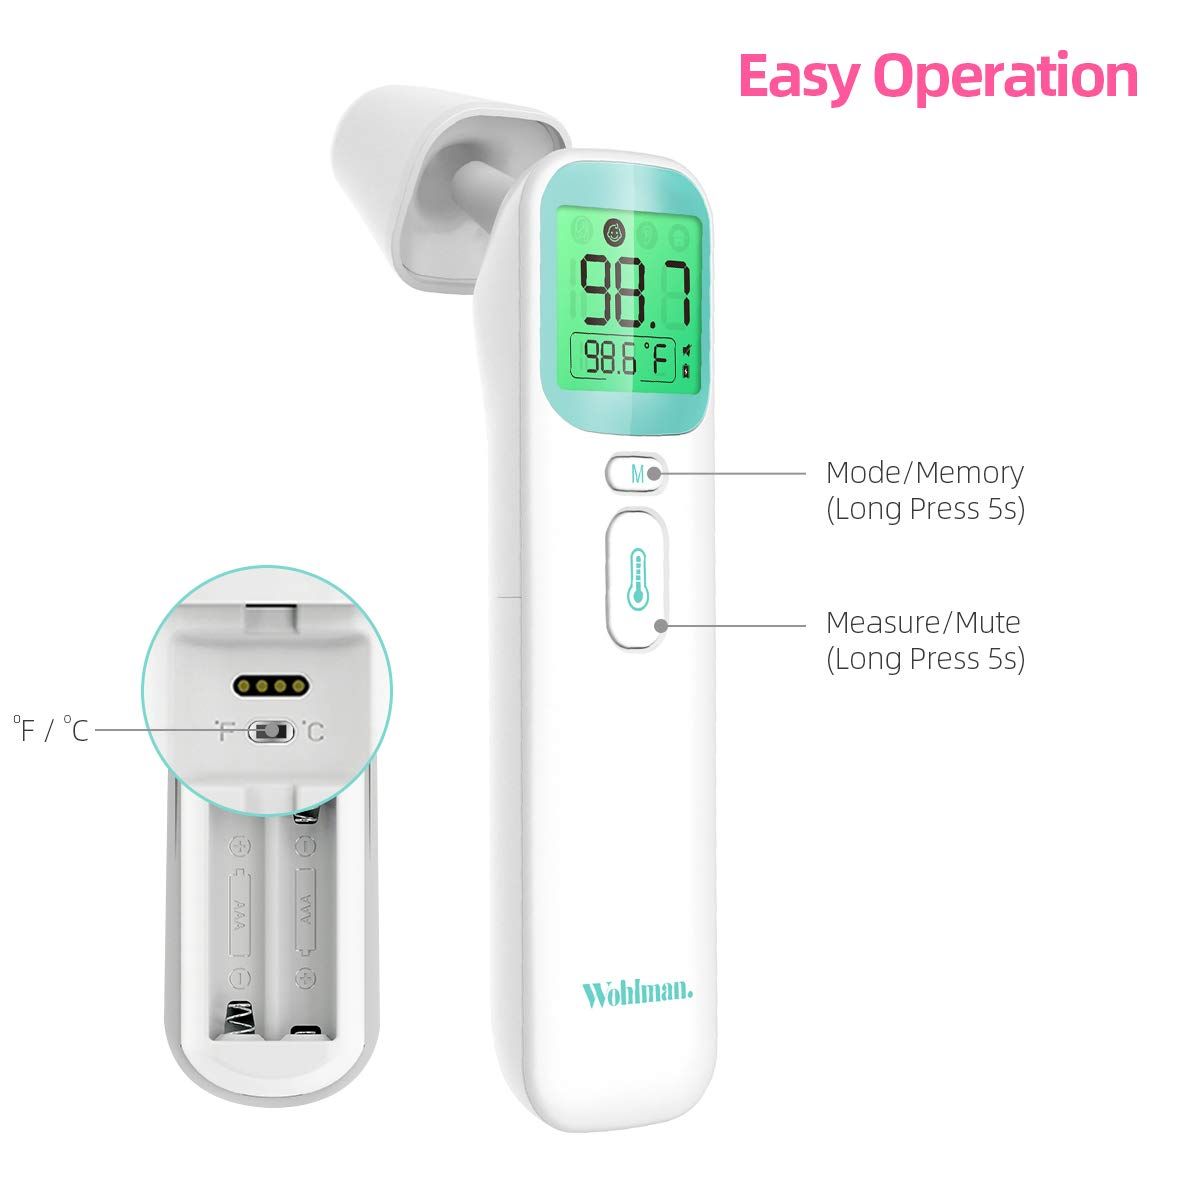 Wohlman Non-Contact IR Thermometer controls